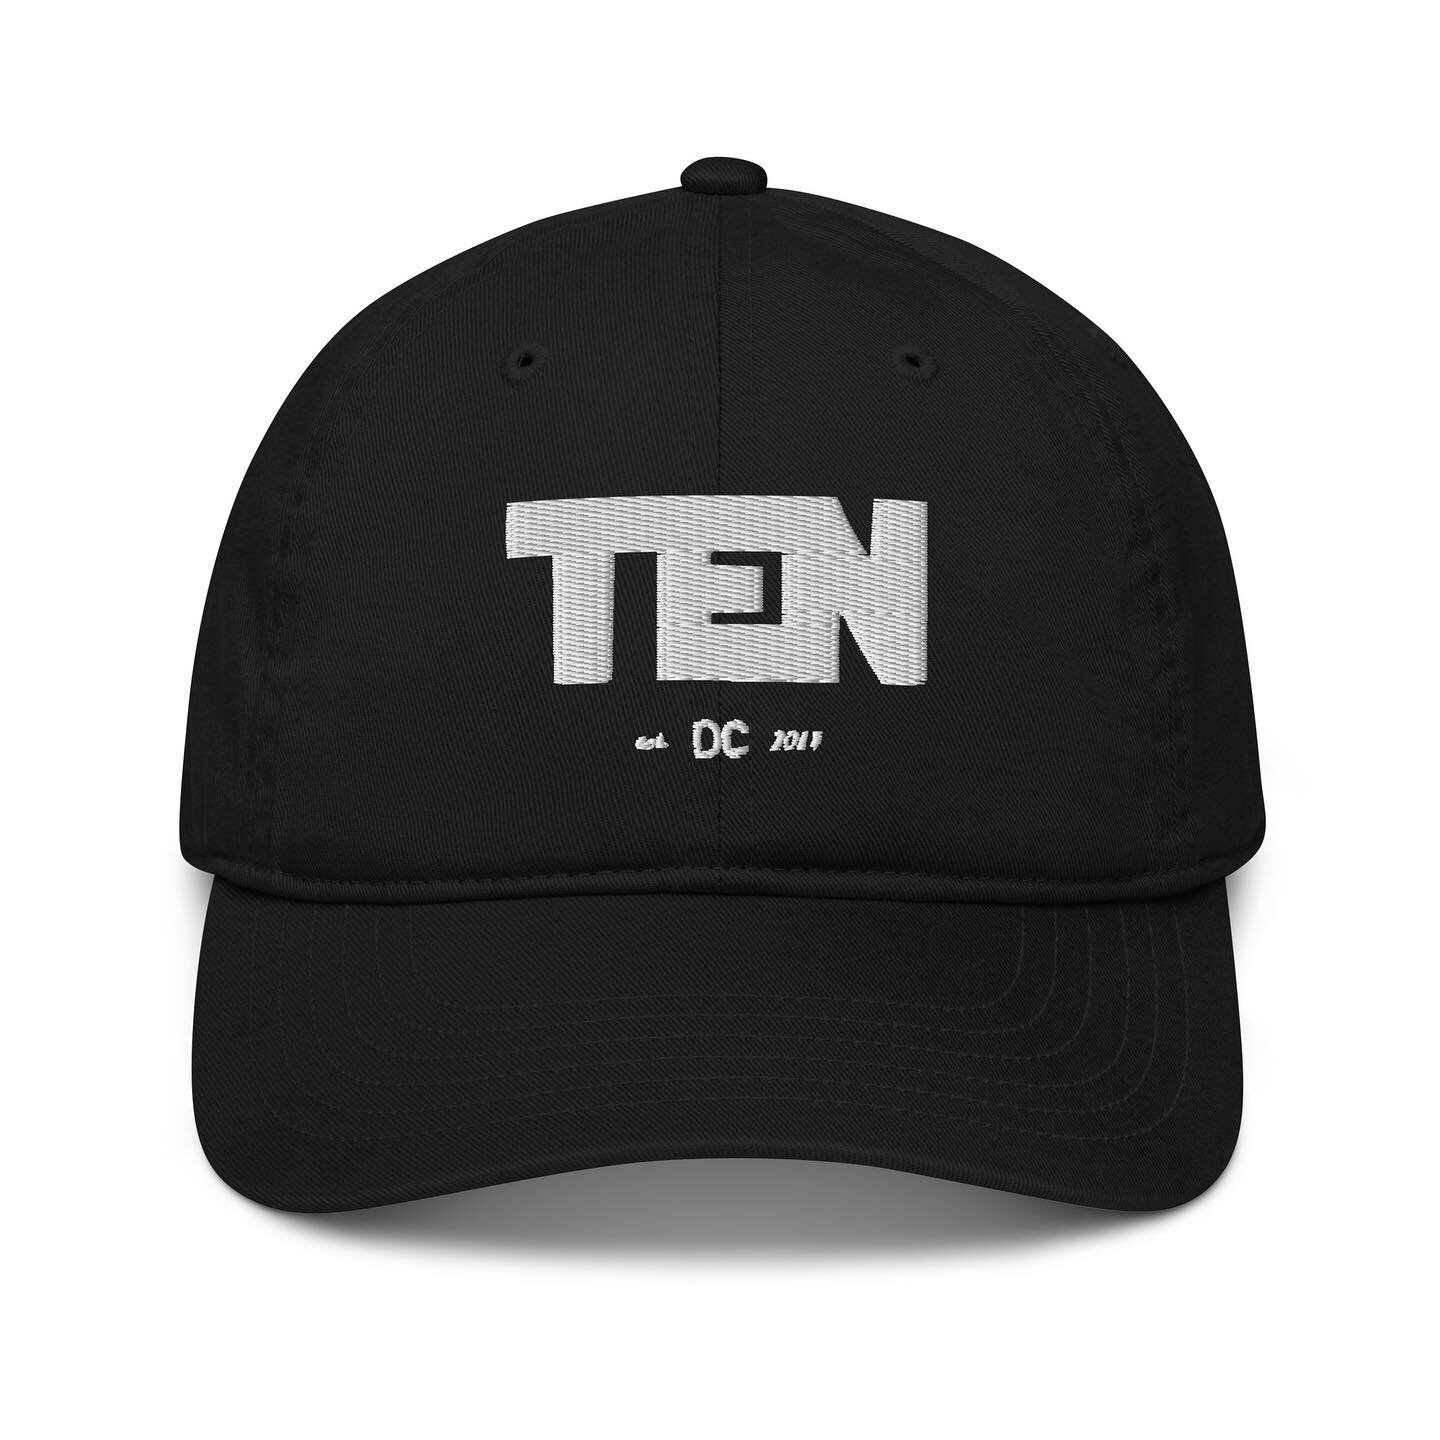 the TEN est DC Dad Cap joins our new signatures line up. Classic fit, adjustable strap and brim. 

the pursuit of perfection isn&rsquo;t about not making mistakes, it&rsquo;s about bringing the energy needed in this world. 

CREATE x LEAD x LOVE 

te